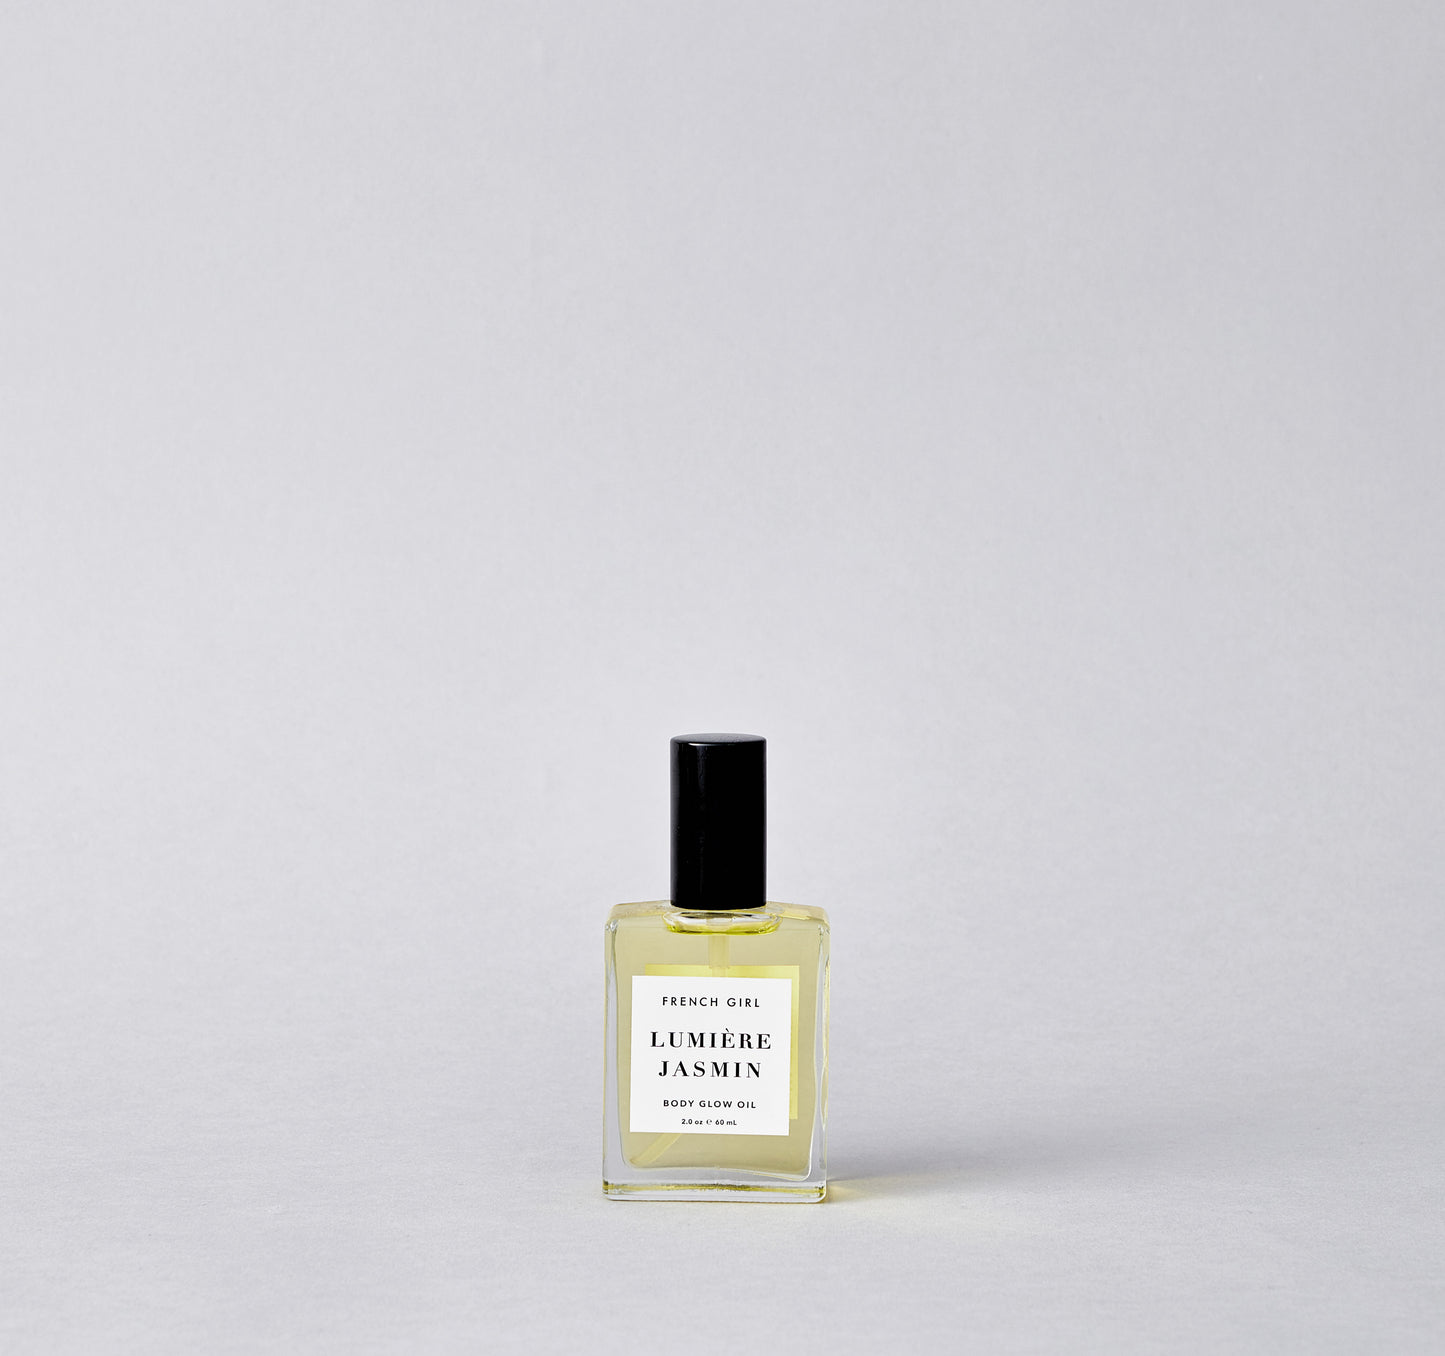 A luxurious jasmine body oil formulated with a lightweight blend of nourishing organic oils to leave skin resilient and glowing.